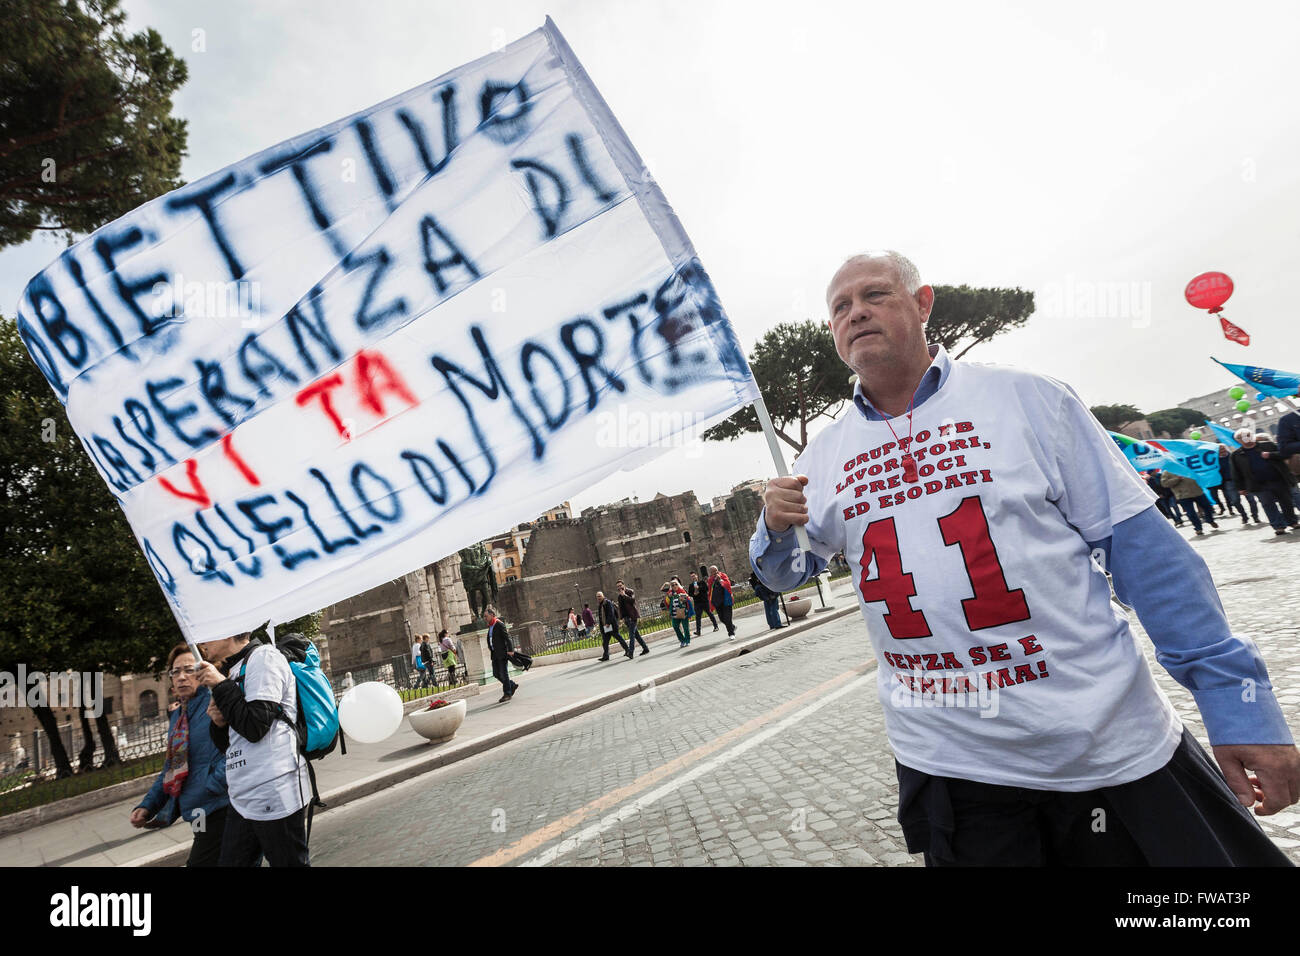 Rome, Italy. 02nd Apr, 2016. Members of three major Labor Unions of Italy (CGIL, CISL, UIL) take to the streets to protest against Fornero pension reform law in Rome, Italy. Thousands of demonstrators take part in an anti-government rally called by CGIL, CISL and UIL (the three Major Labor Unions of Italy), to ask for changes on pension law made by former Minister of Labor Elsa Fornero. Credit:  Giuseppe Ciccia/Pacific Press/Alamy Live News Stock Photo